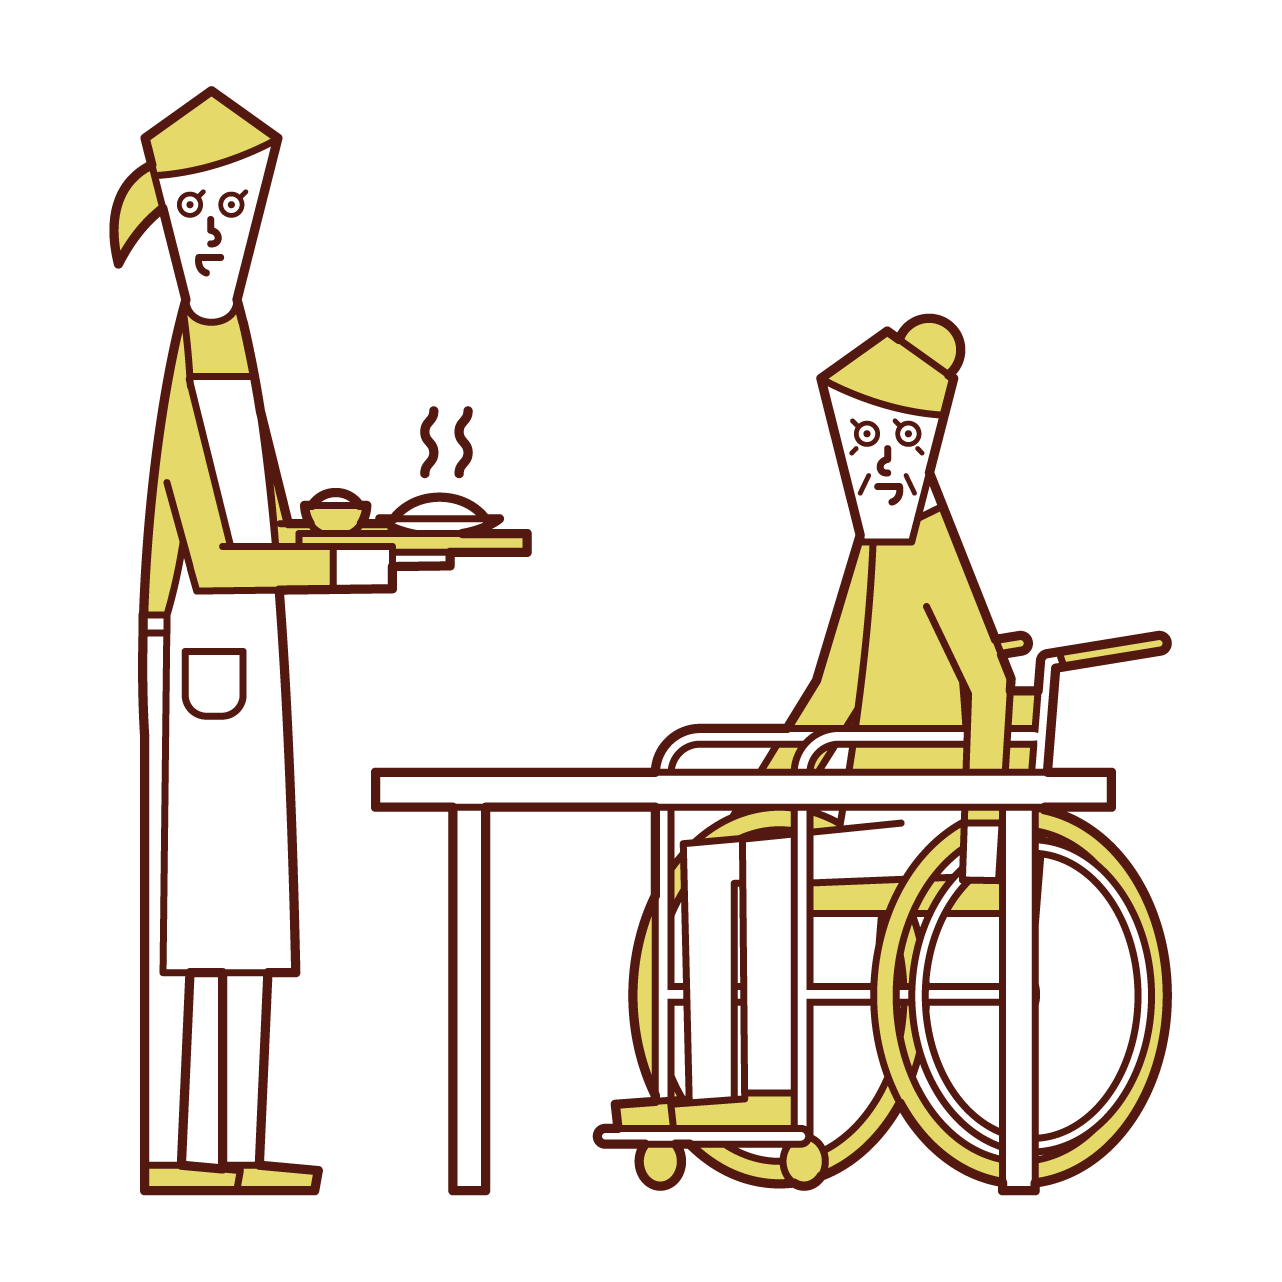 Illustration of care worker and home helper (woman) who prepares meals